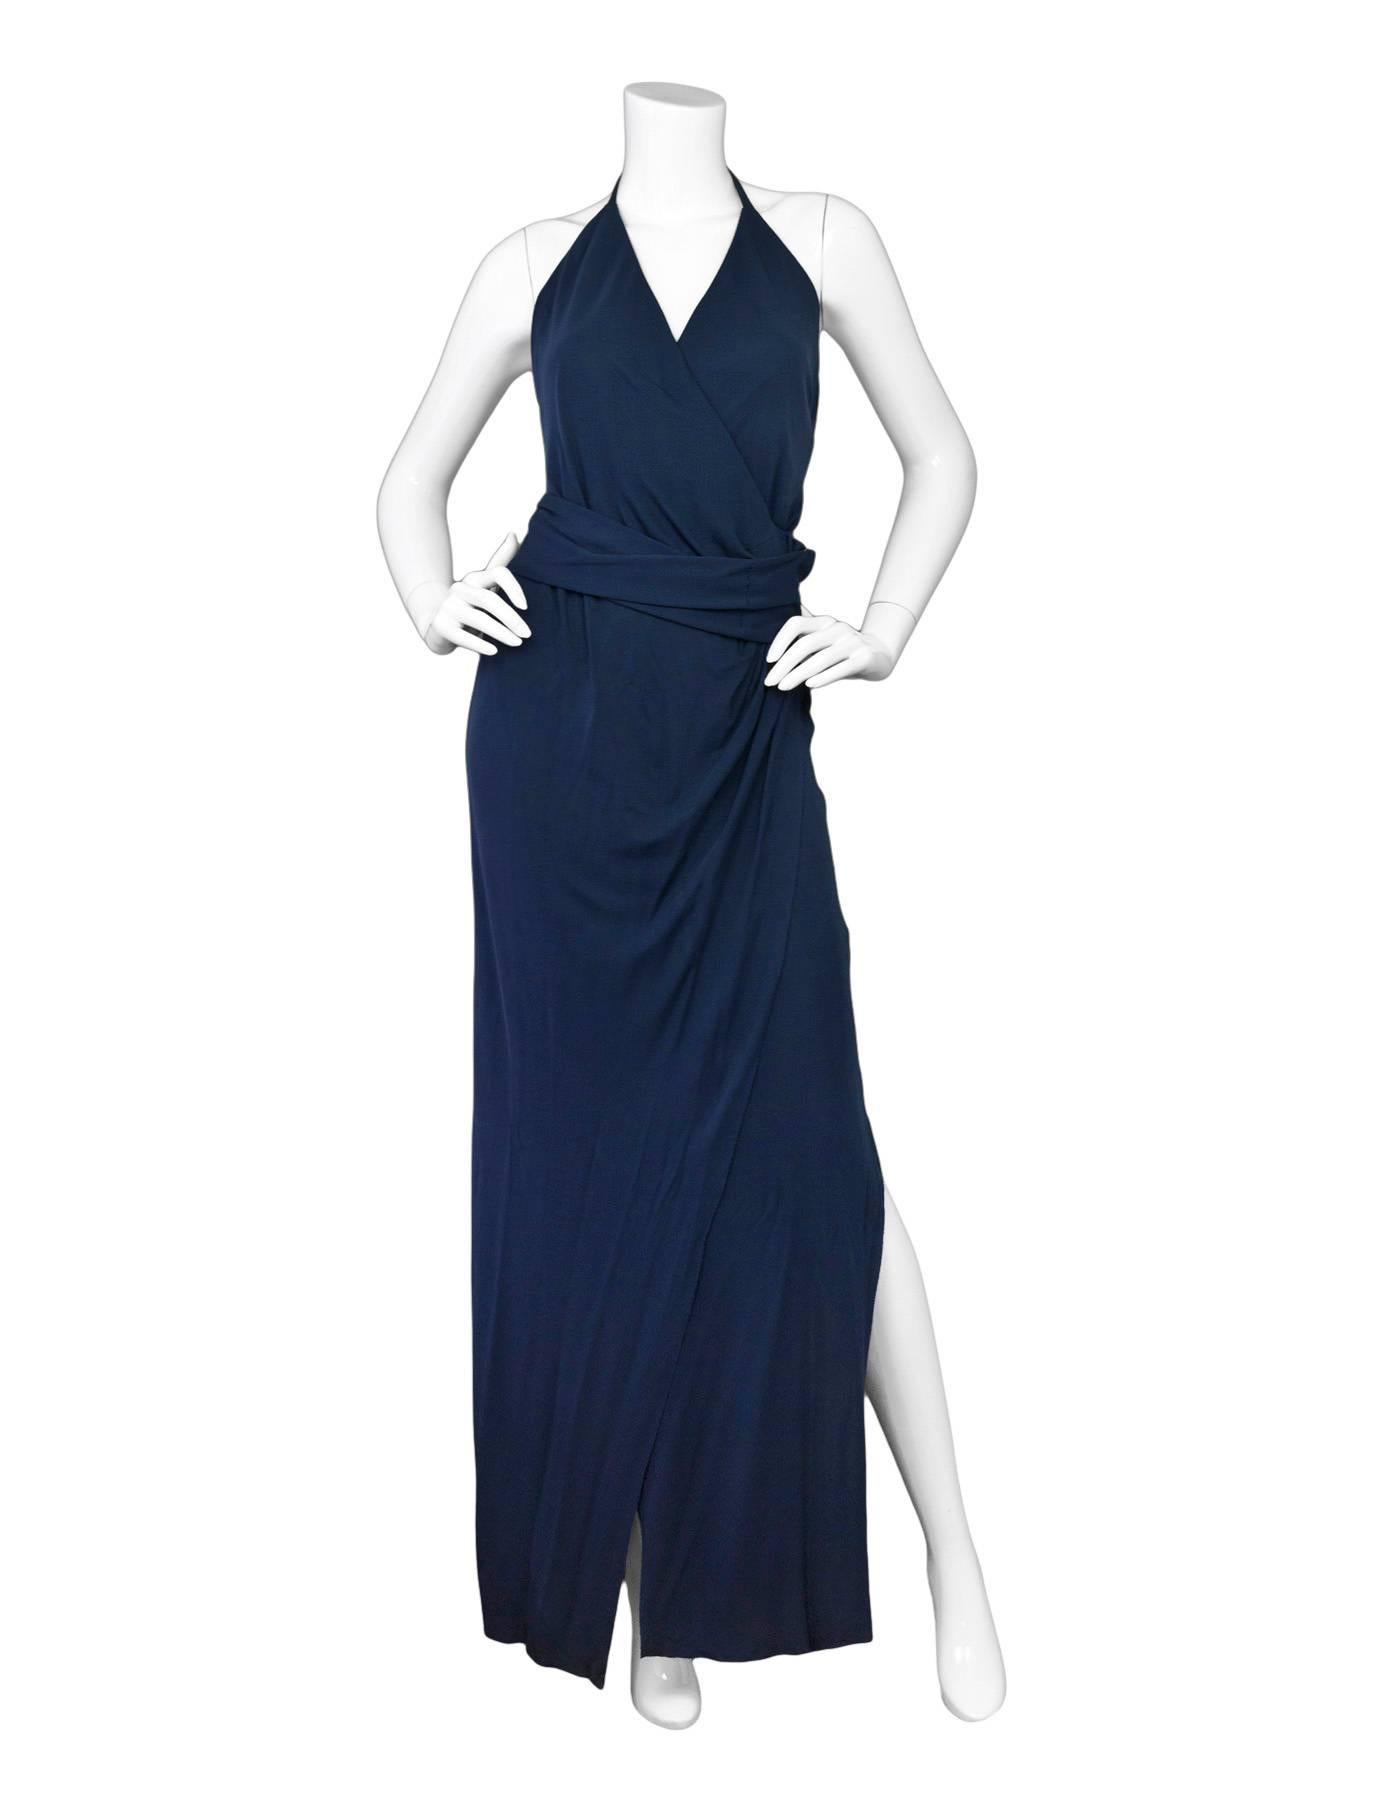 L'Agence Navy Sabrina Wrap-Effect Halter Neck Gown 
Features wrap at waist with snaps at hip

Made In: China
Color: Navy
Composition: 100% viscose
Lining: None
Closure/Opening: Back zip up
Exterior Pockets: None
Interior Pockets: None
Retail Price: